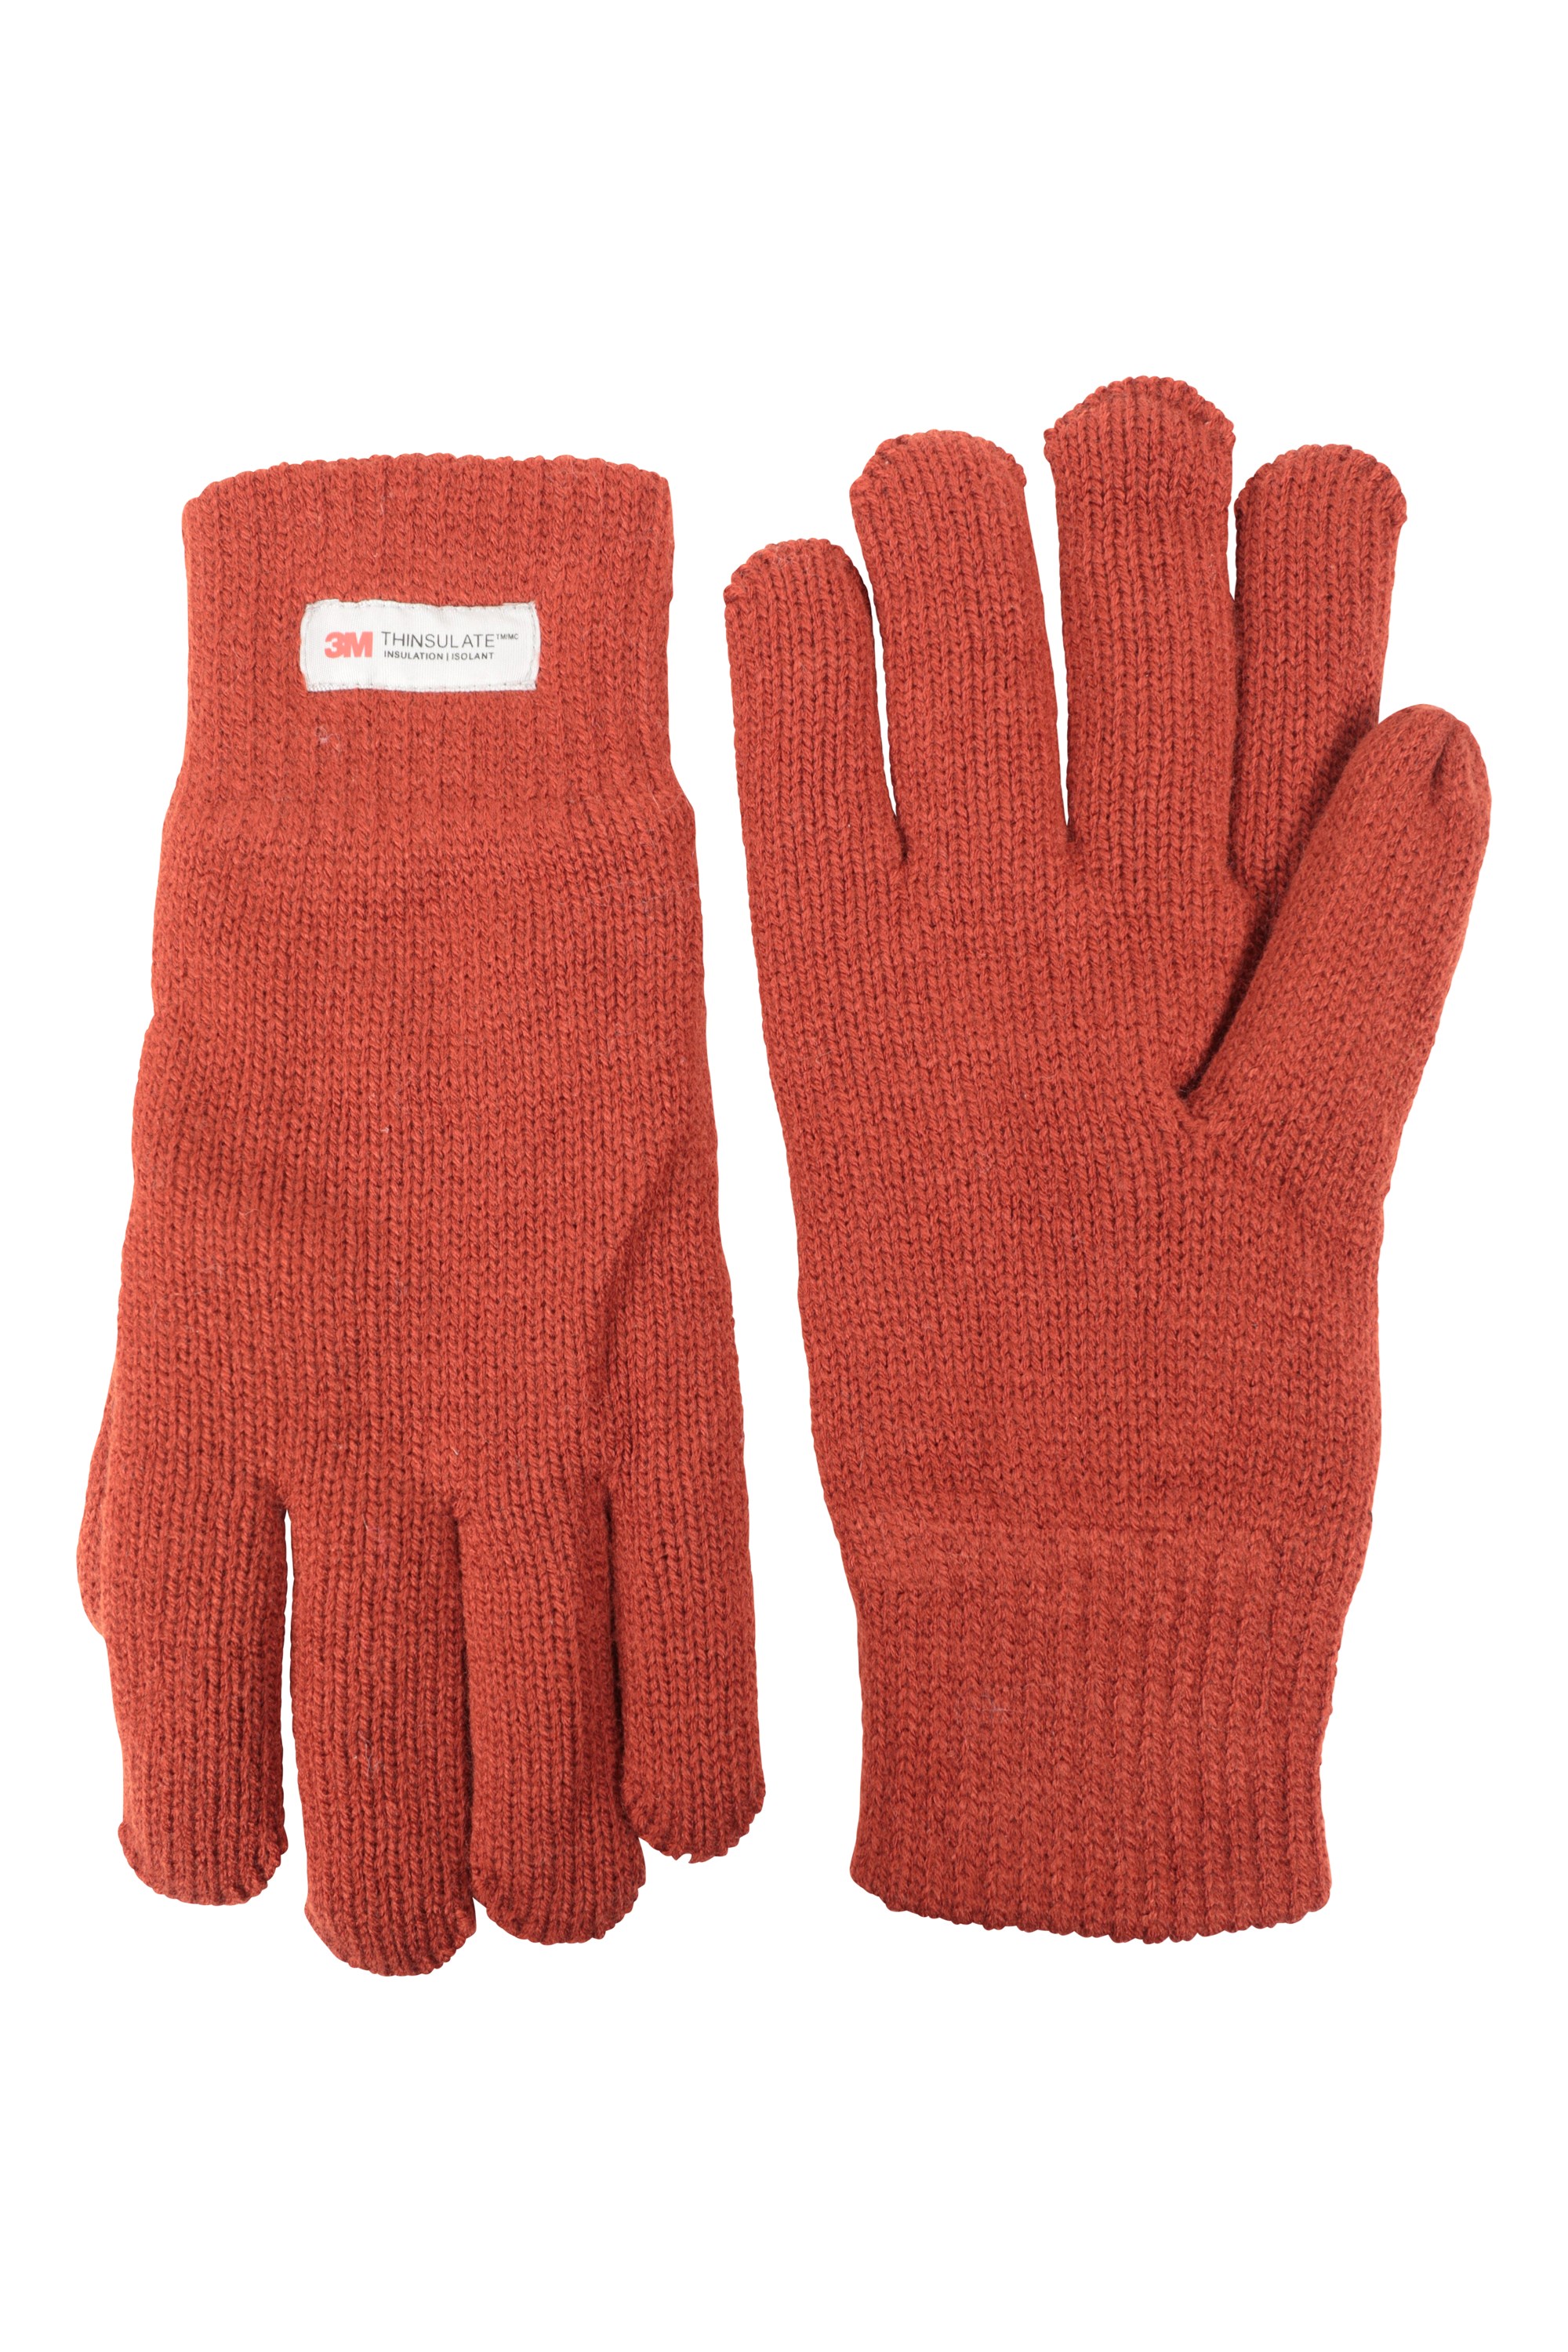 Mountain Warehouse Thinsulate Mens Knitted Gloves - Orange | Size ONE